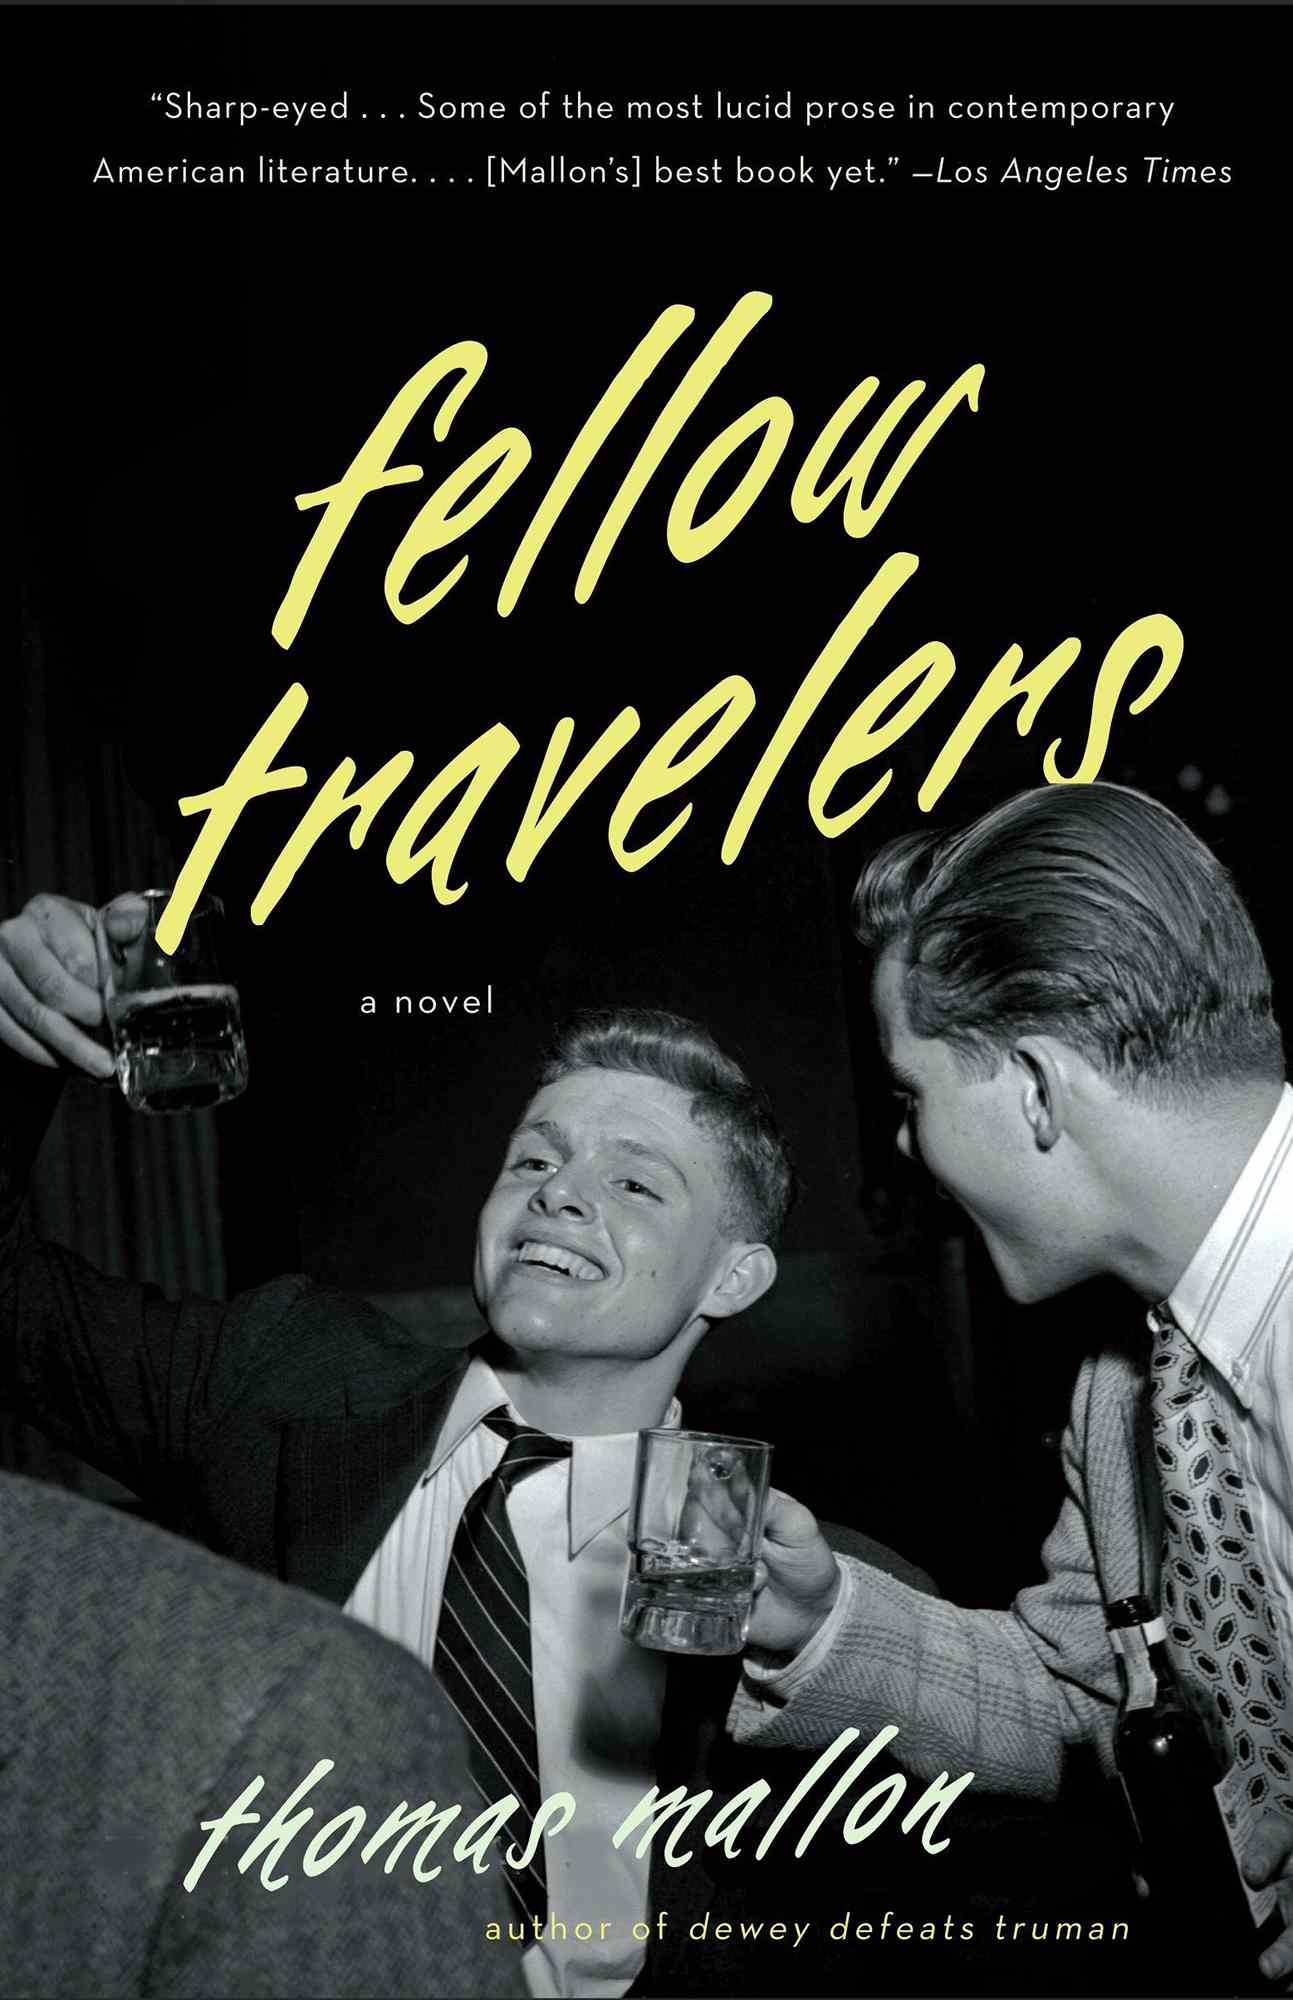 Fellow Travelers Paperback – May 6, 2008 by Thomas Mallon